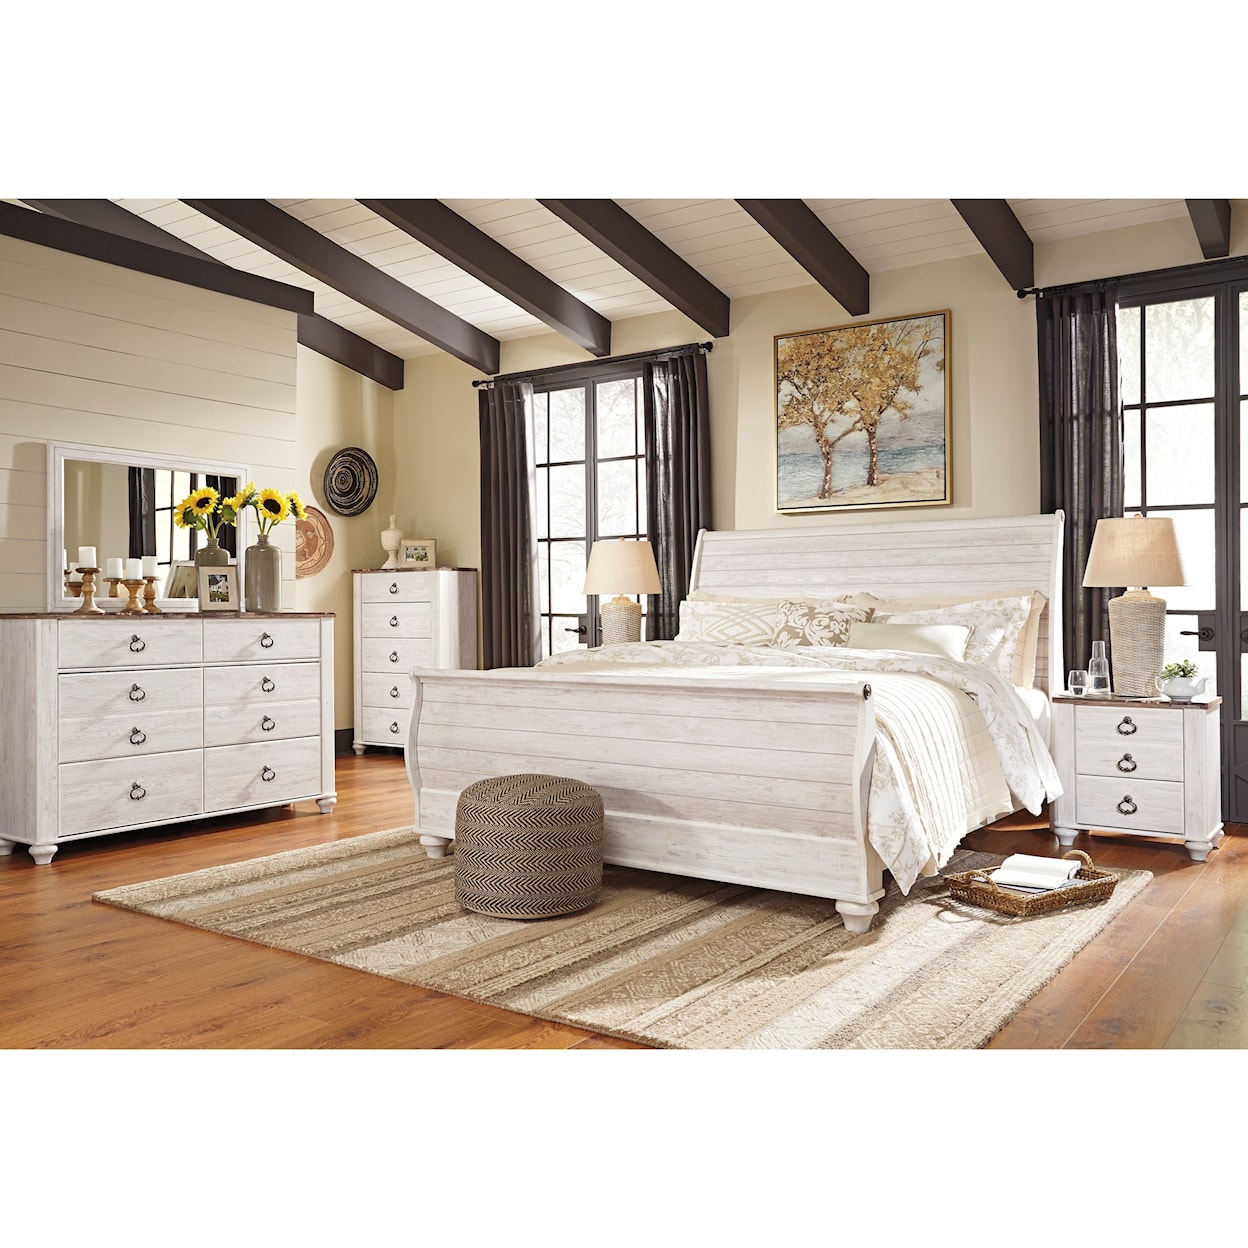 Ashley Furniture Signature Design Willowton King Bedroom Group